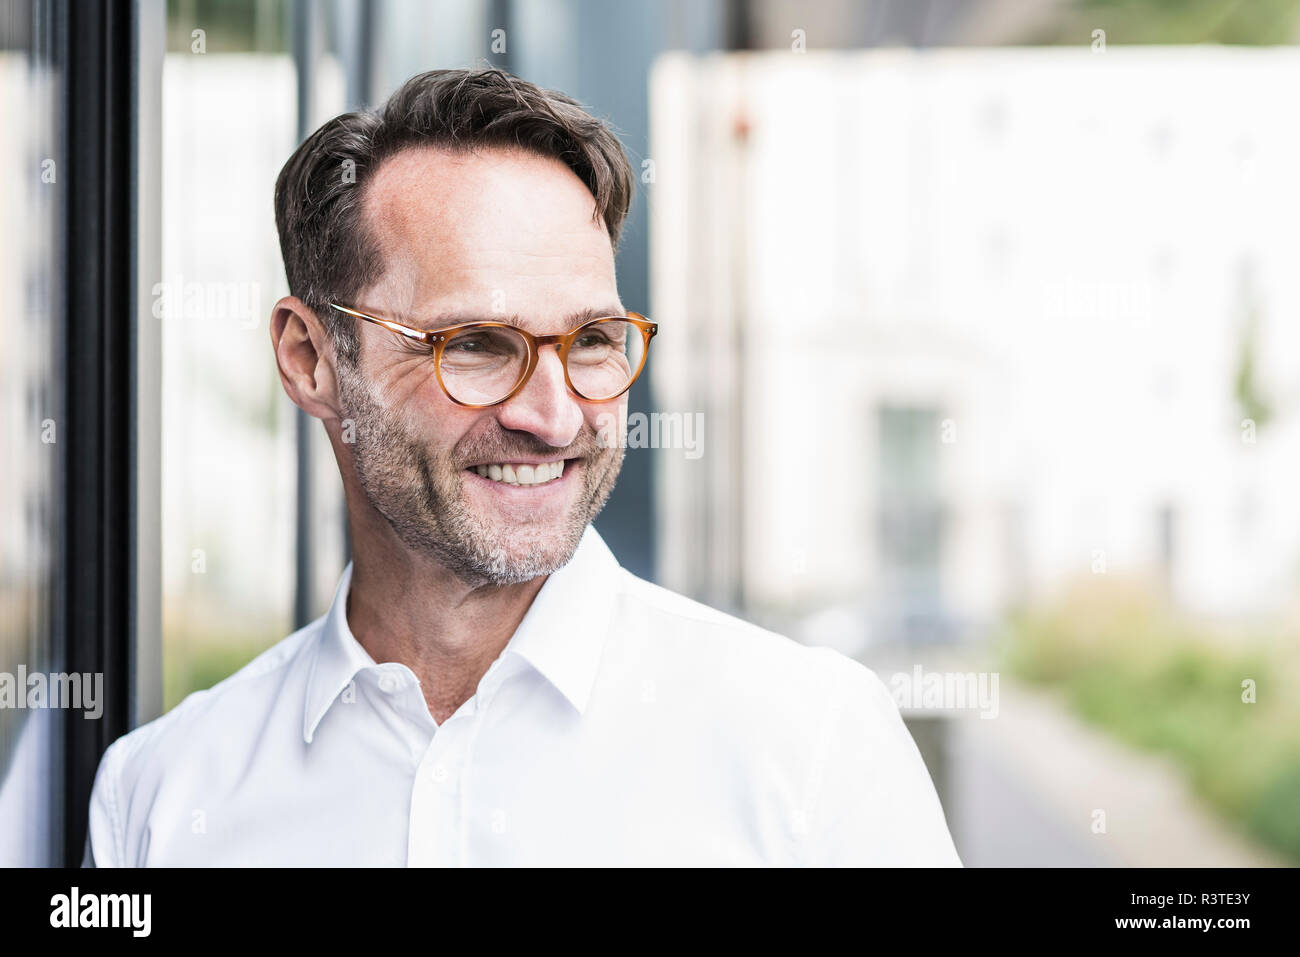 Portrait of smiling businessman with stubble wearing glasses Stock Photo